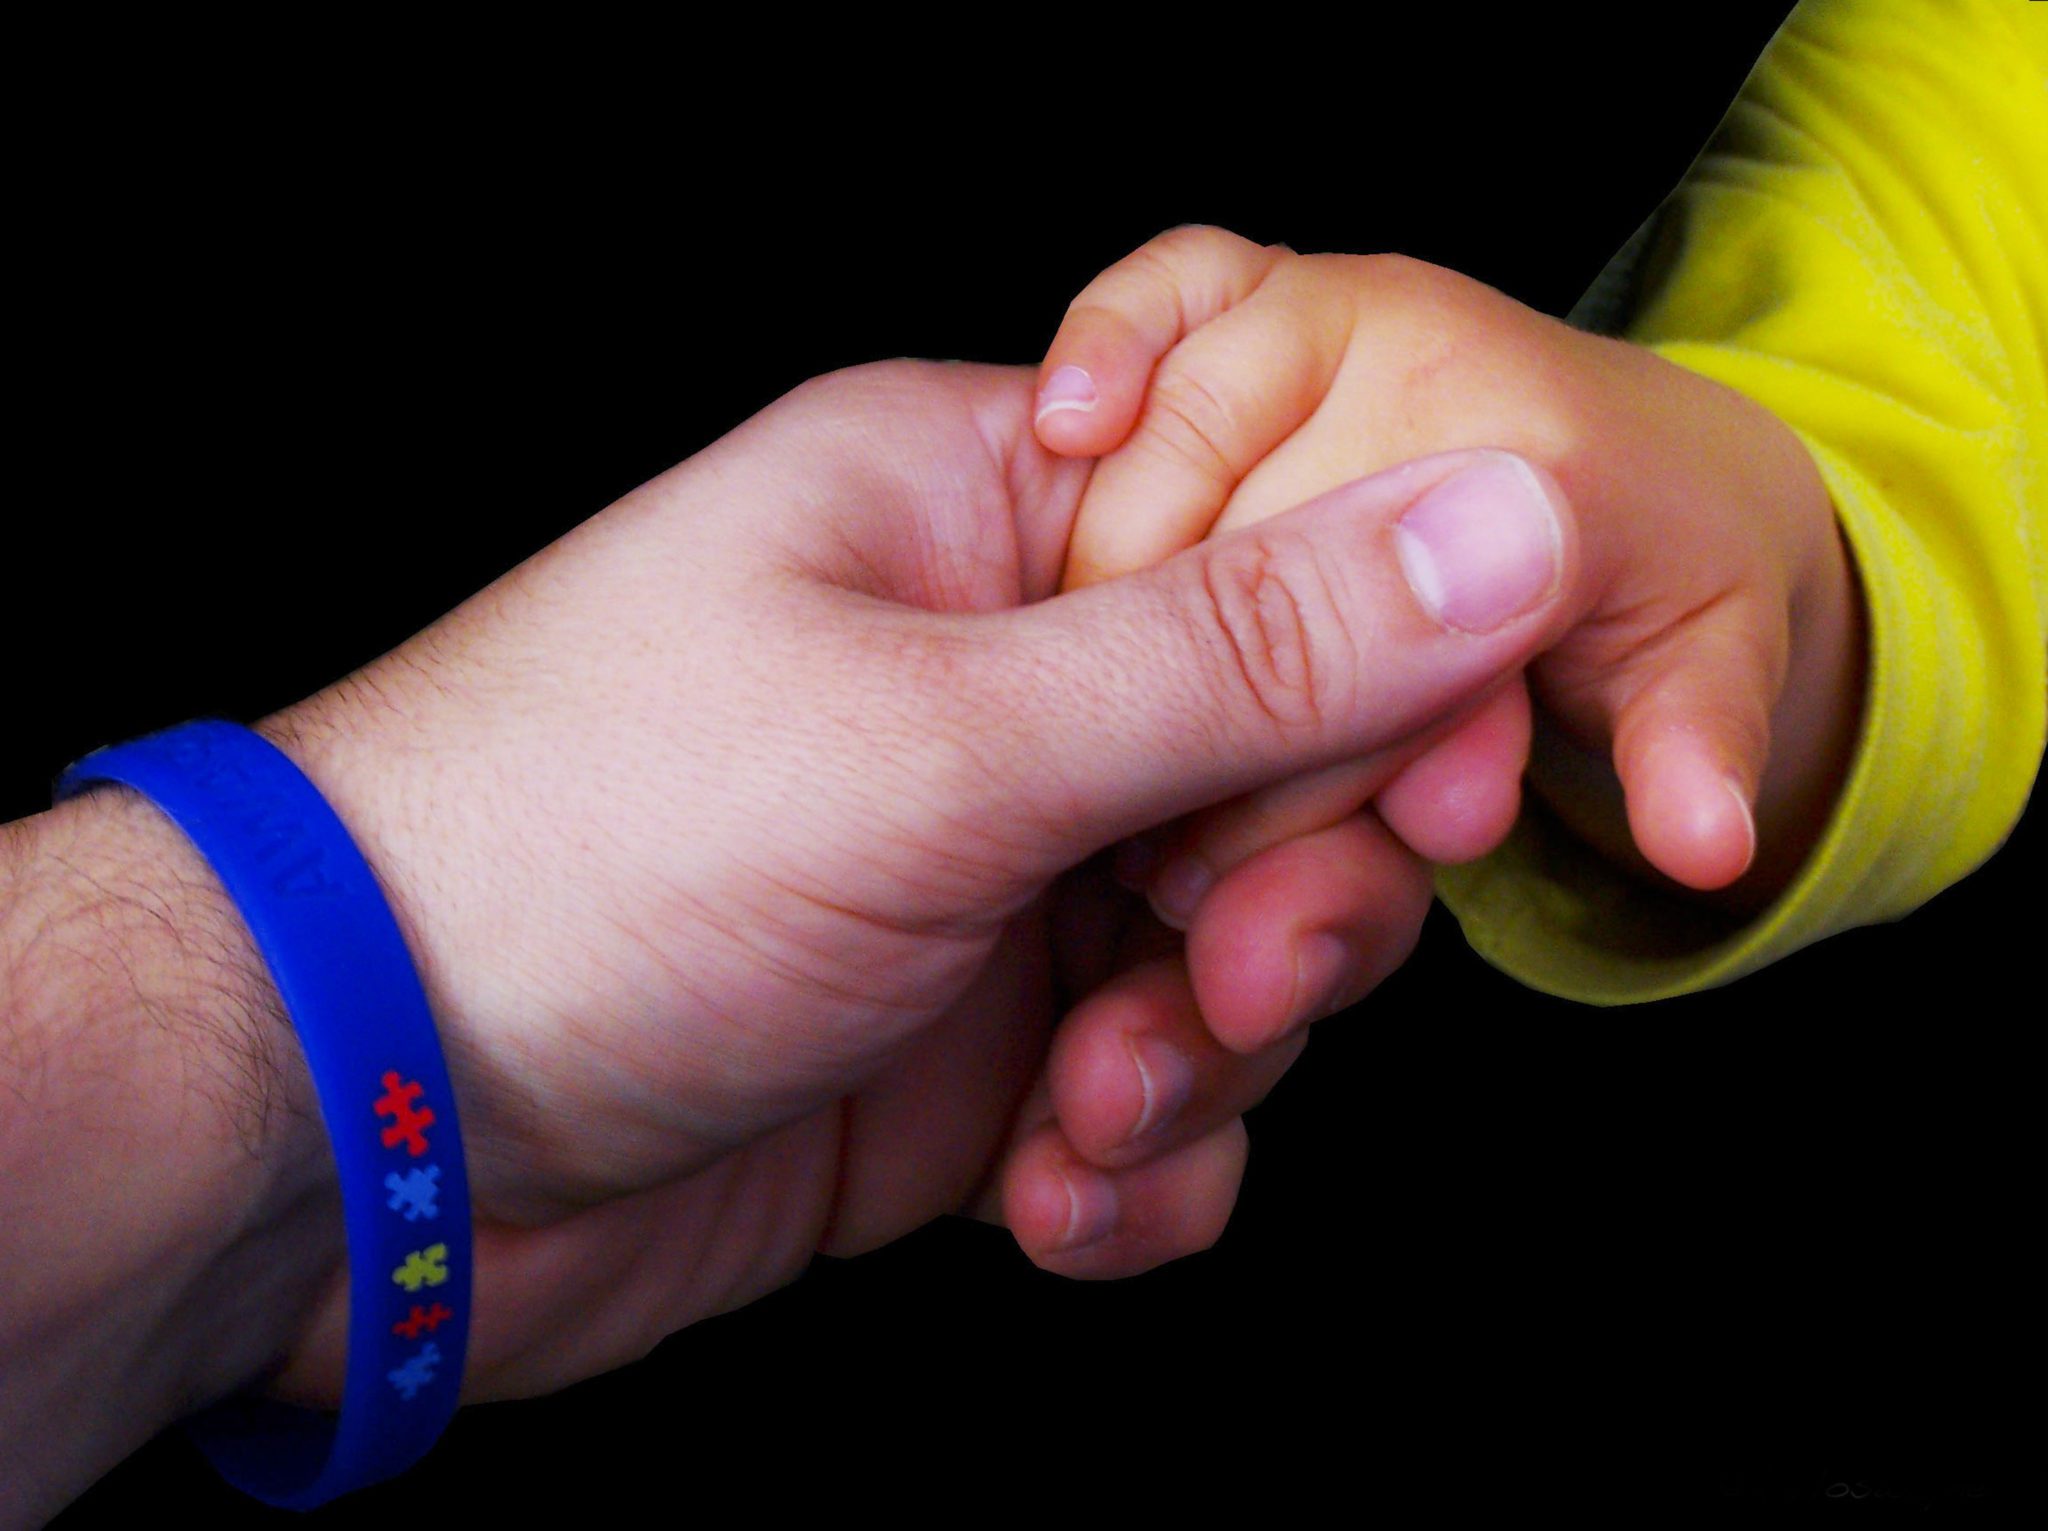 adult hand with an autism awareness wrist band holding an autistic baby hand